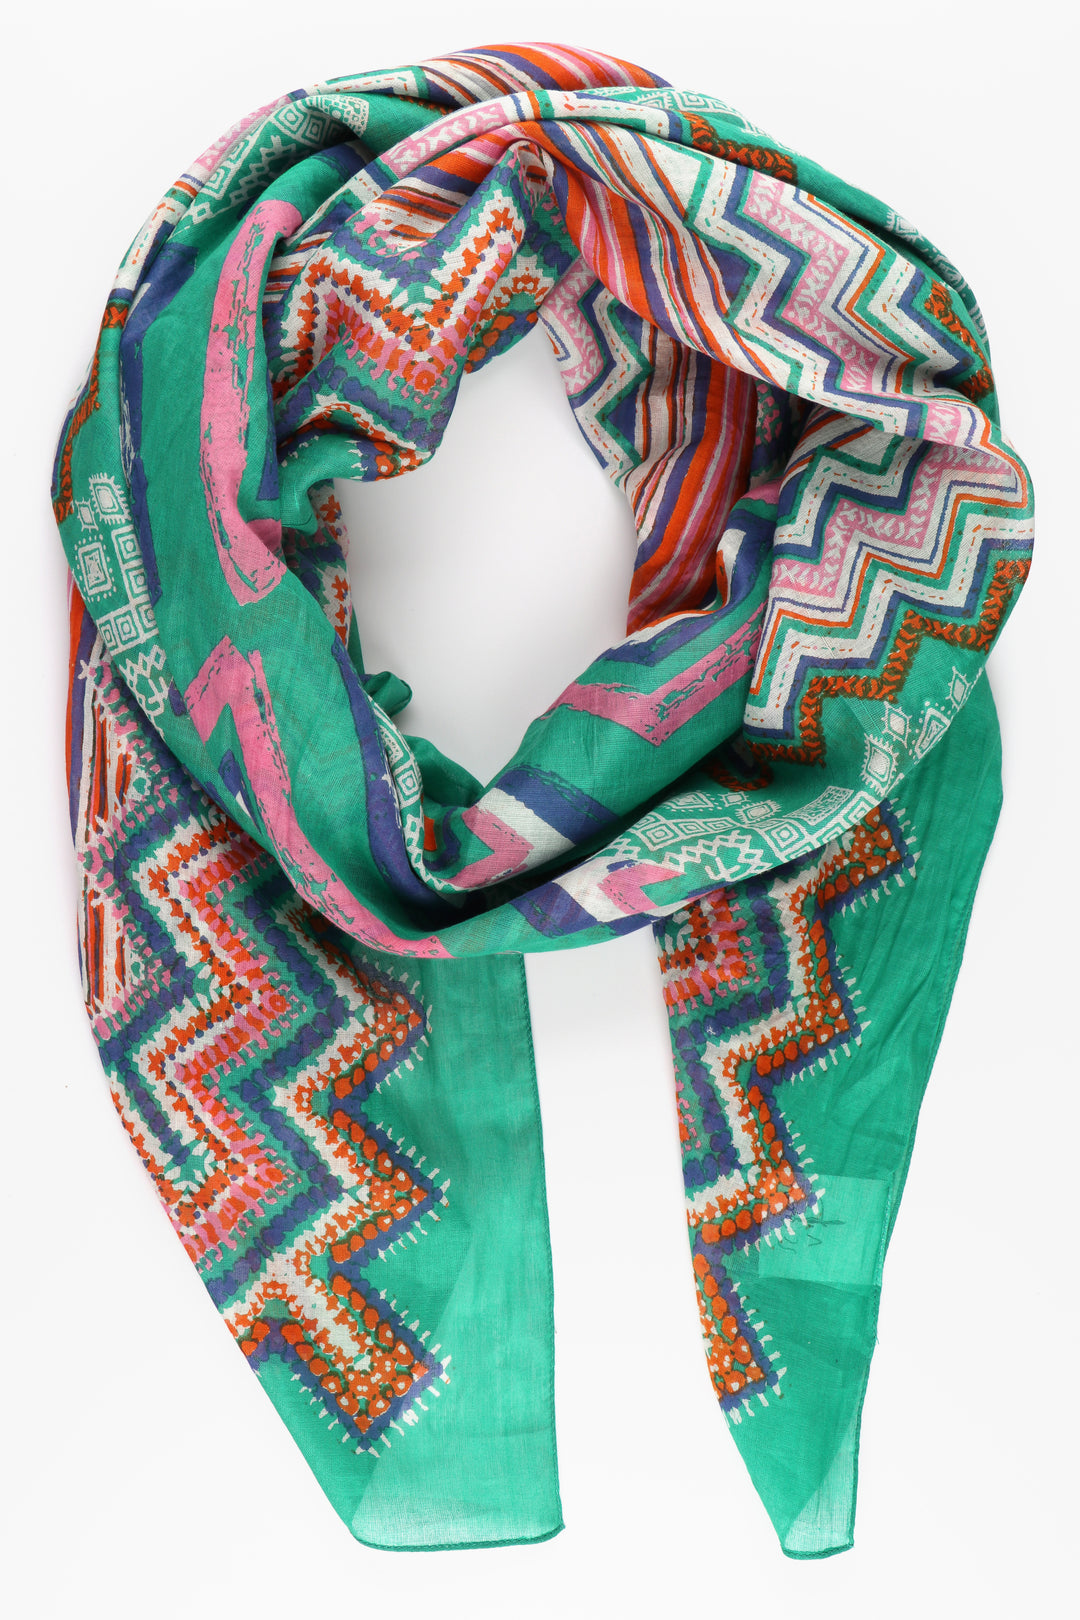 green cotton scarf with geometric ikat diamond shaped patterns and zig zag lines in pink